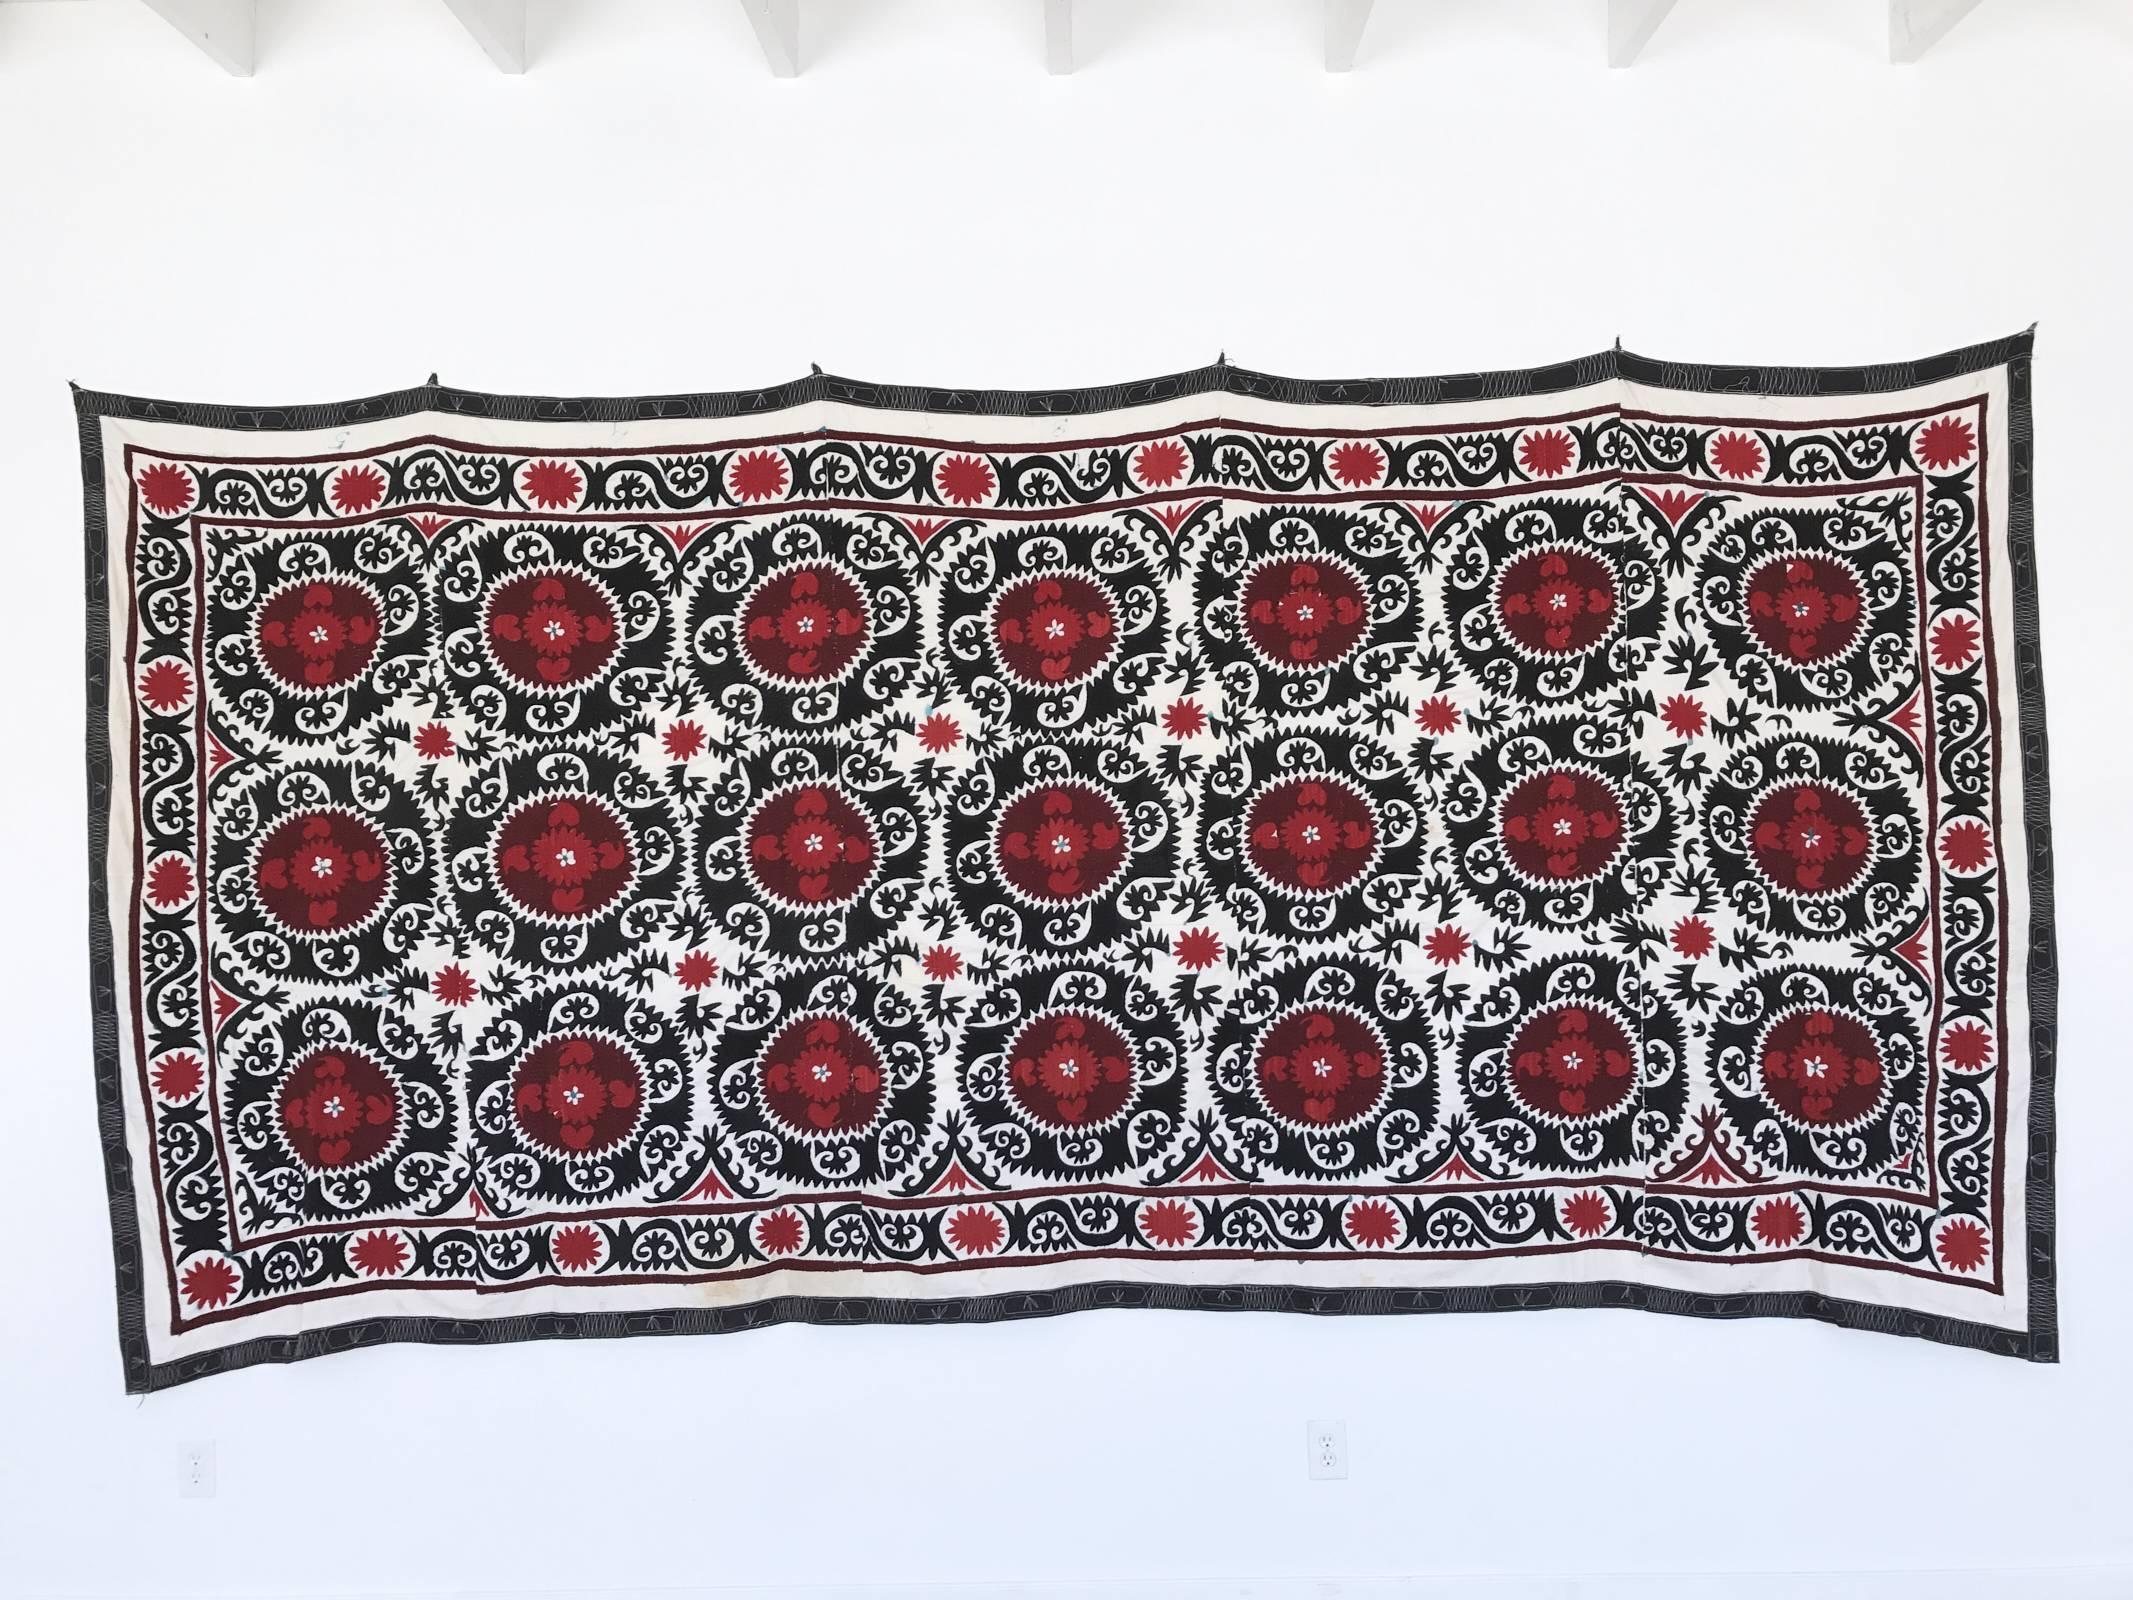 Intricate hand-embroidered needlework Uzbek Suzani with red, black and white geometric and paisley motifs throughout. Black border with white detailing. Linen and cotton with silk threading. Very large size, can act as a bold wall hanging, bedspread